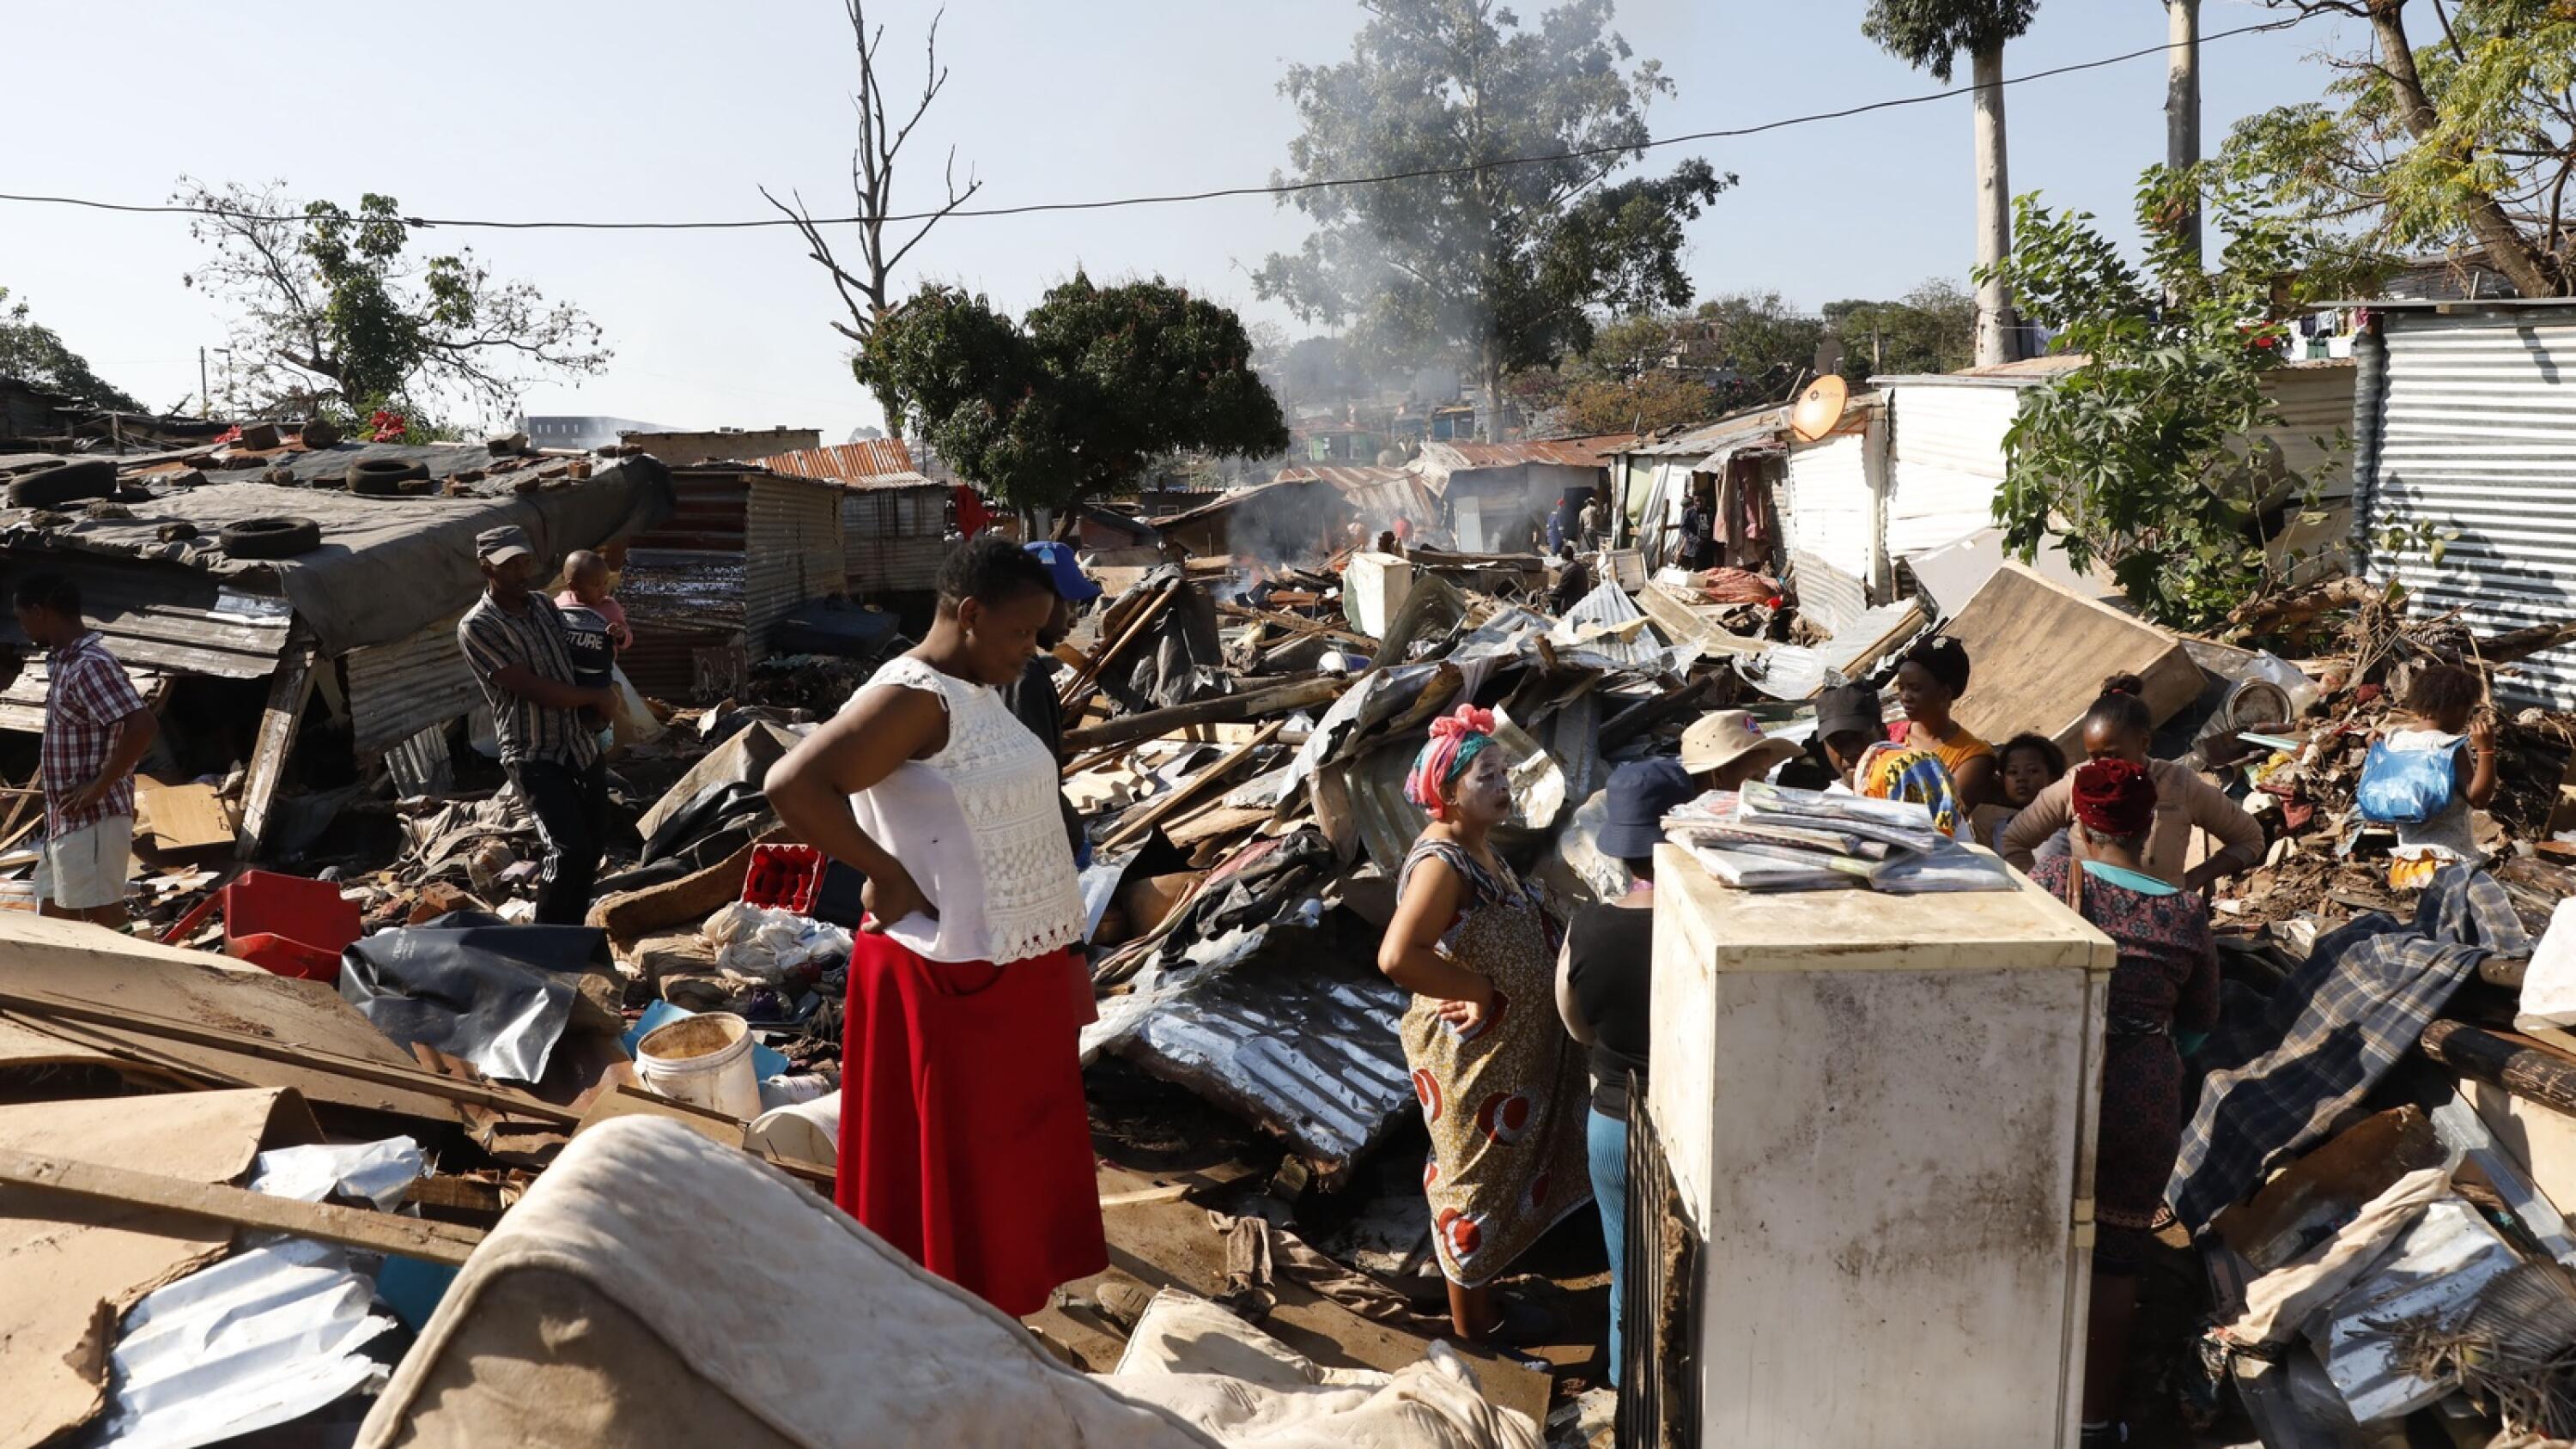 Women stand among debris including beds and roof sheets.